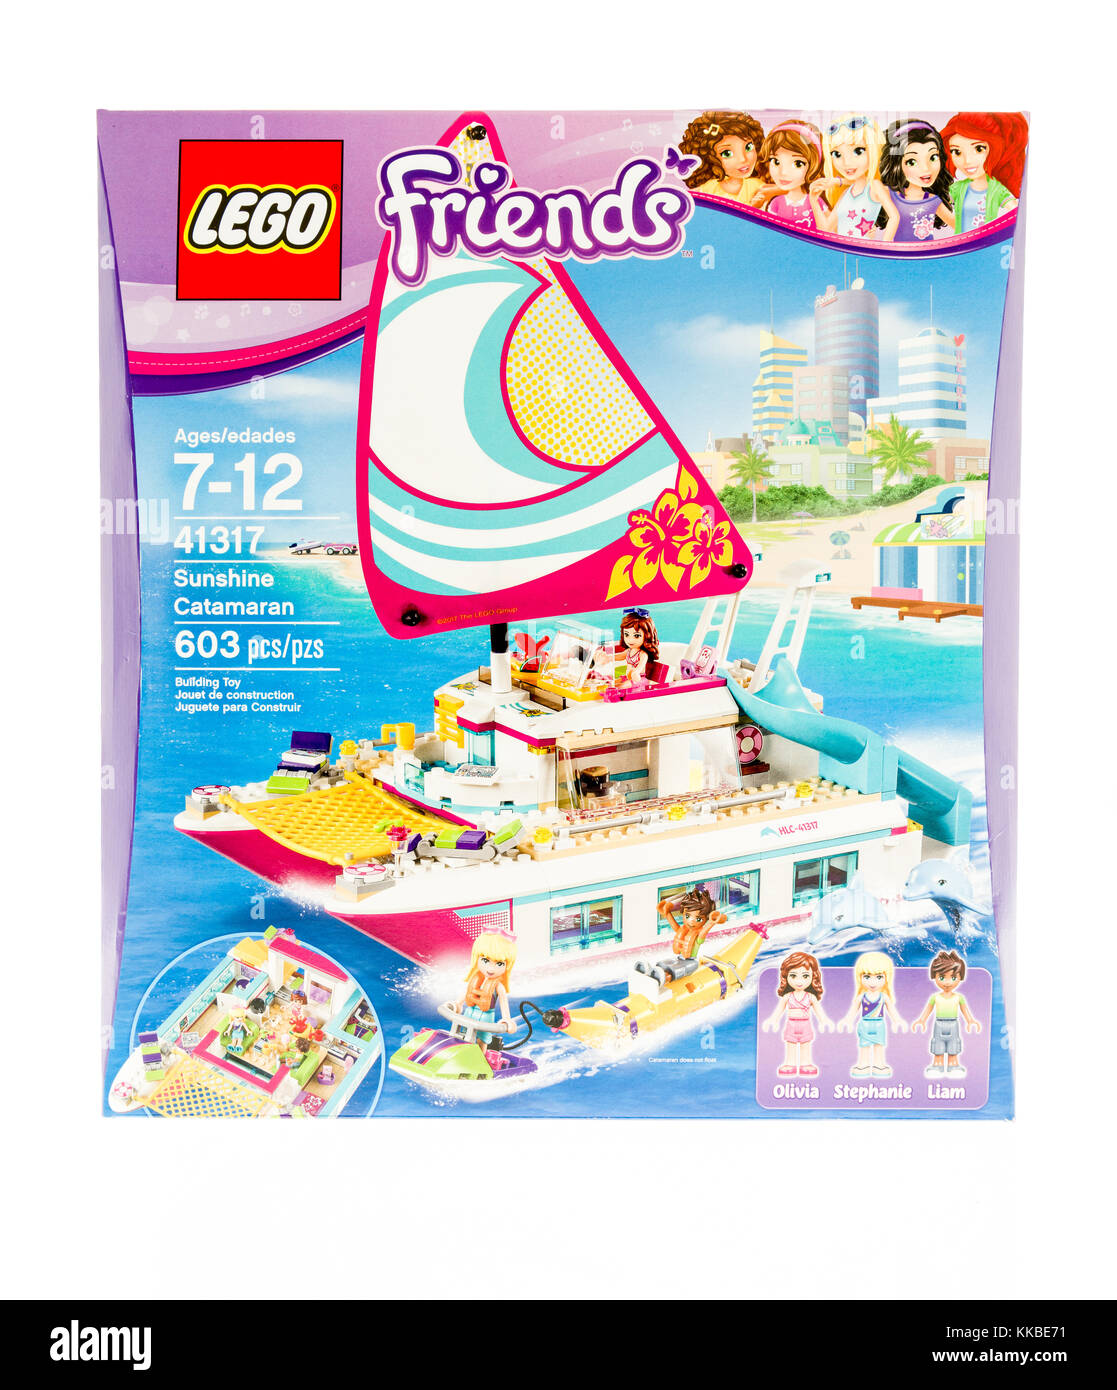 Page 2 - Lego Friends High Resolution Stock Photography and Images - Alamy